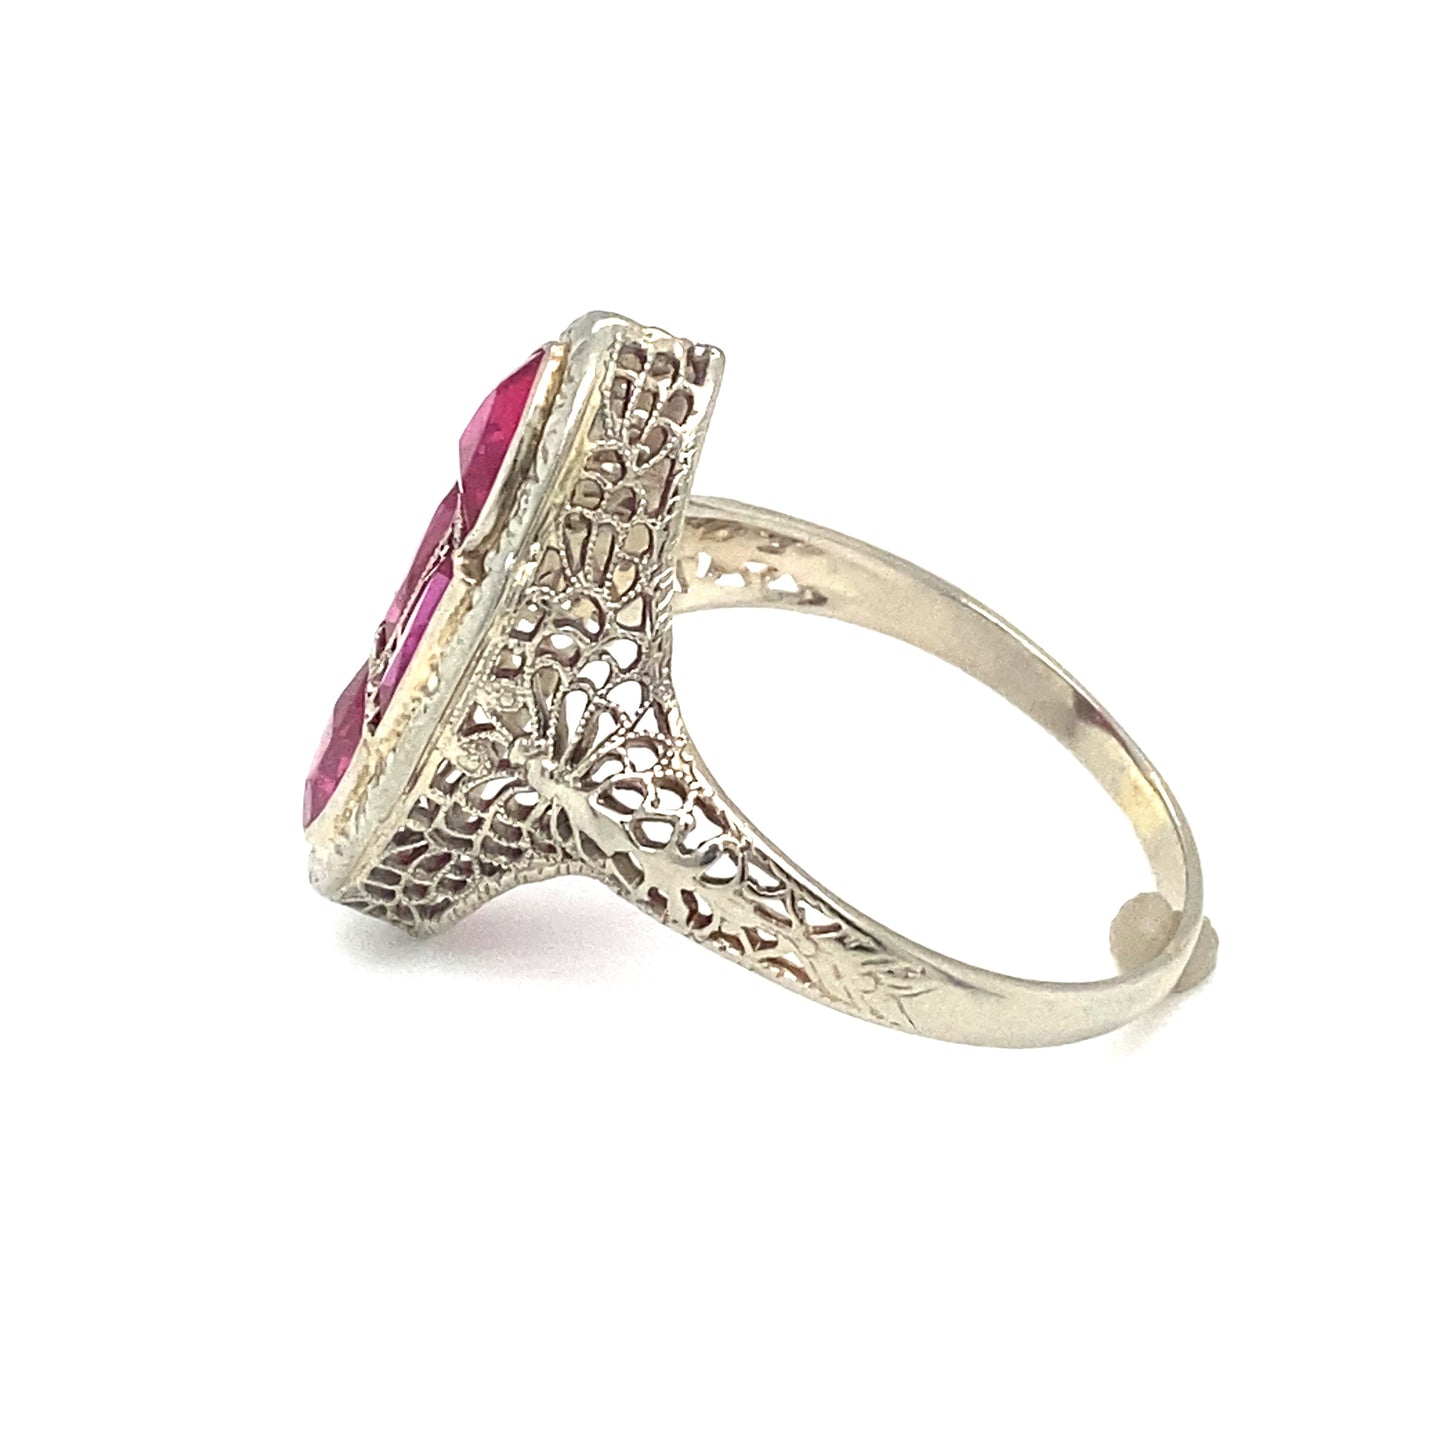 Circa 1920s Art Deco Simulated Ruby Cocktail Ring in 14K White Gold